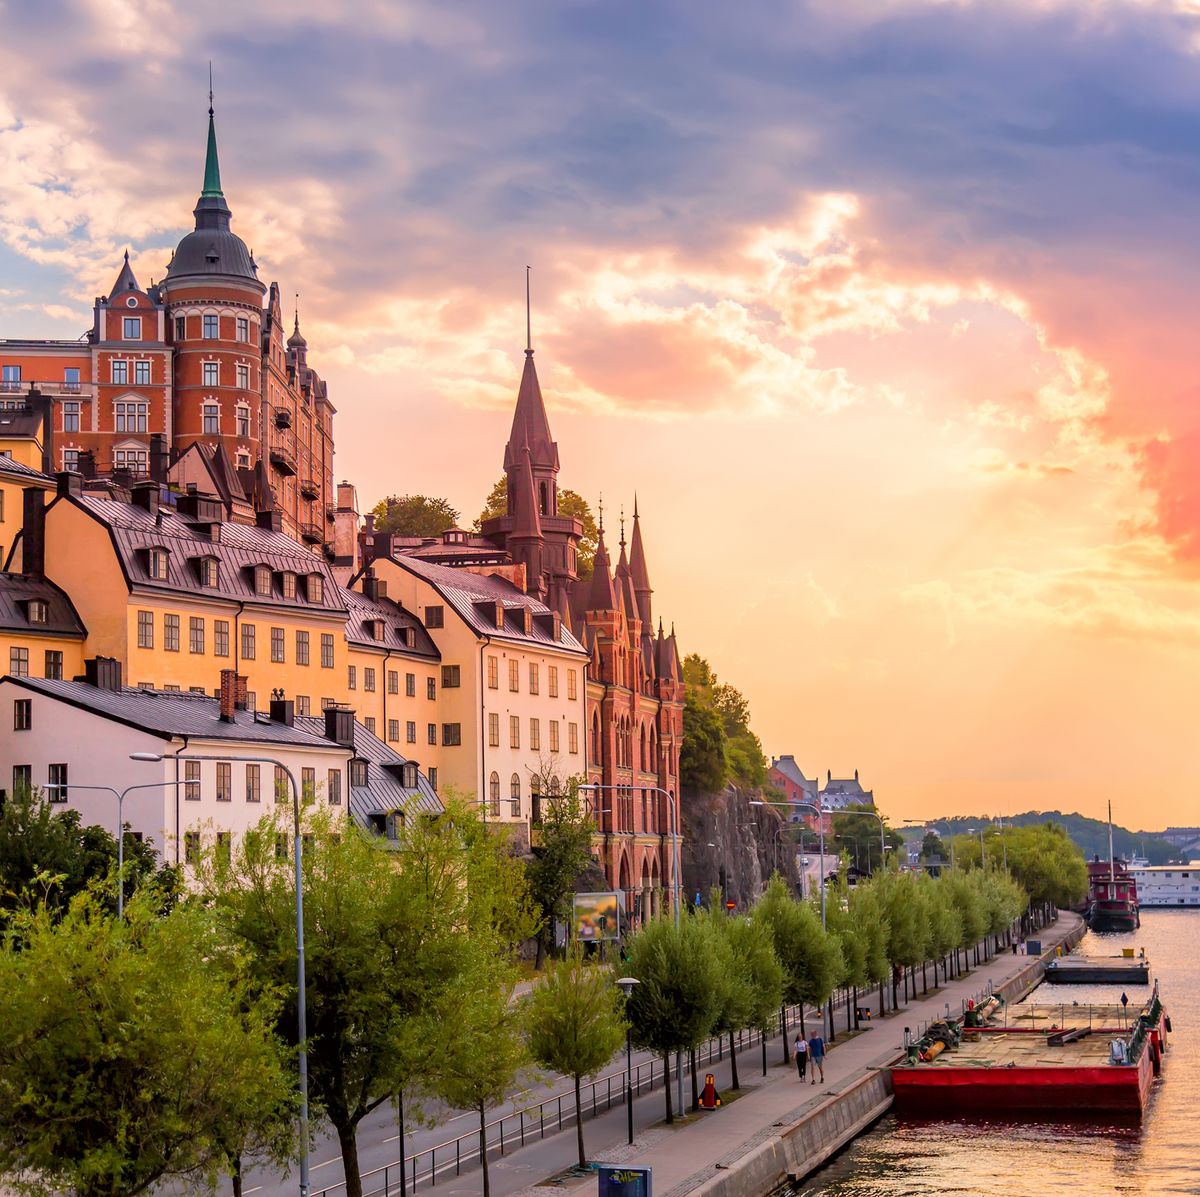 stockholm, sweden scenic summer sunset view with colorful sky of the old town architecture in sodermalm district